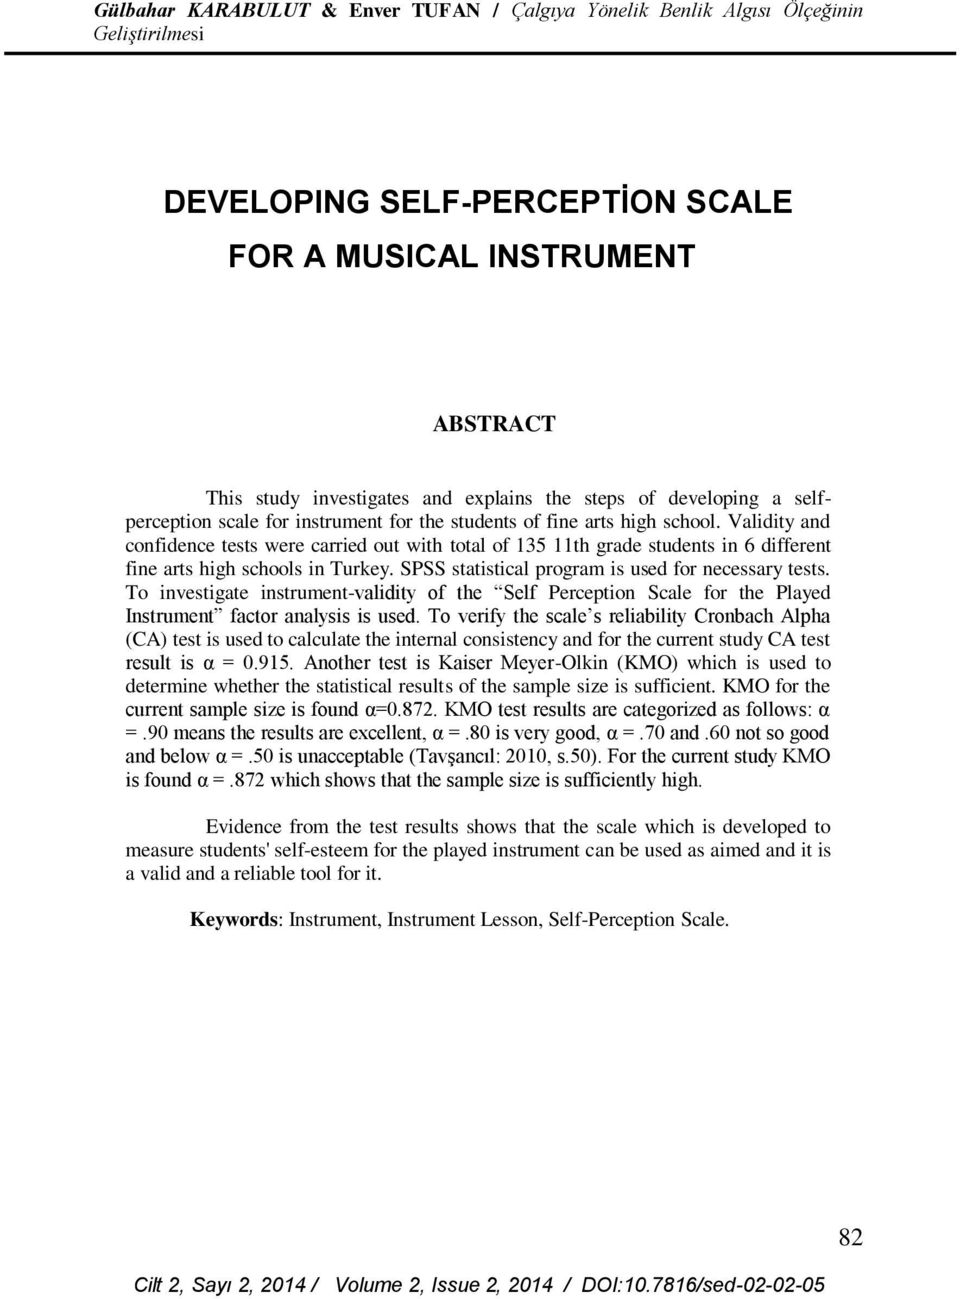 To investigate instrument-validity of the Self Perception Scale for the Played Instrument factor analysis is used.